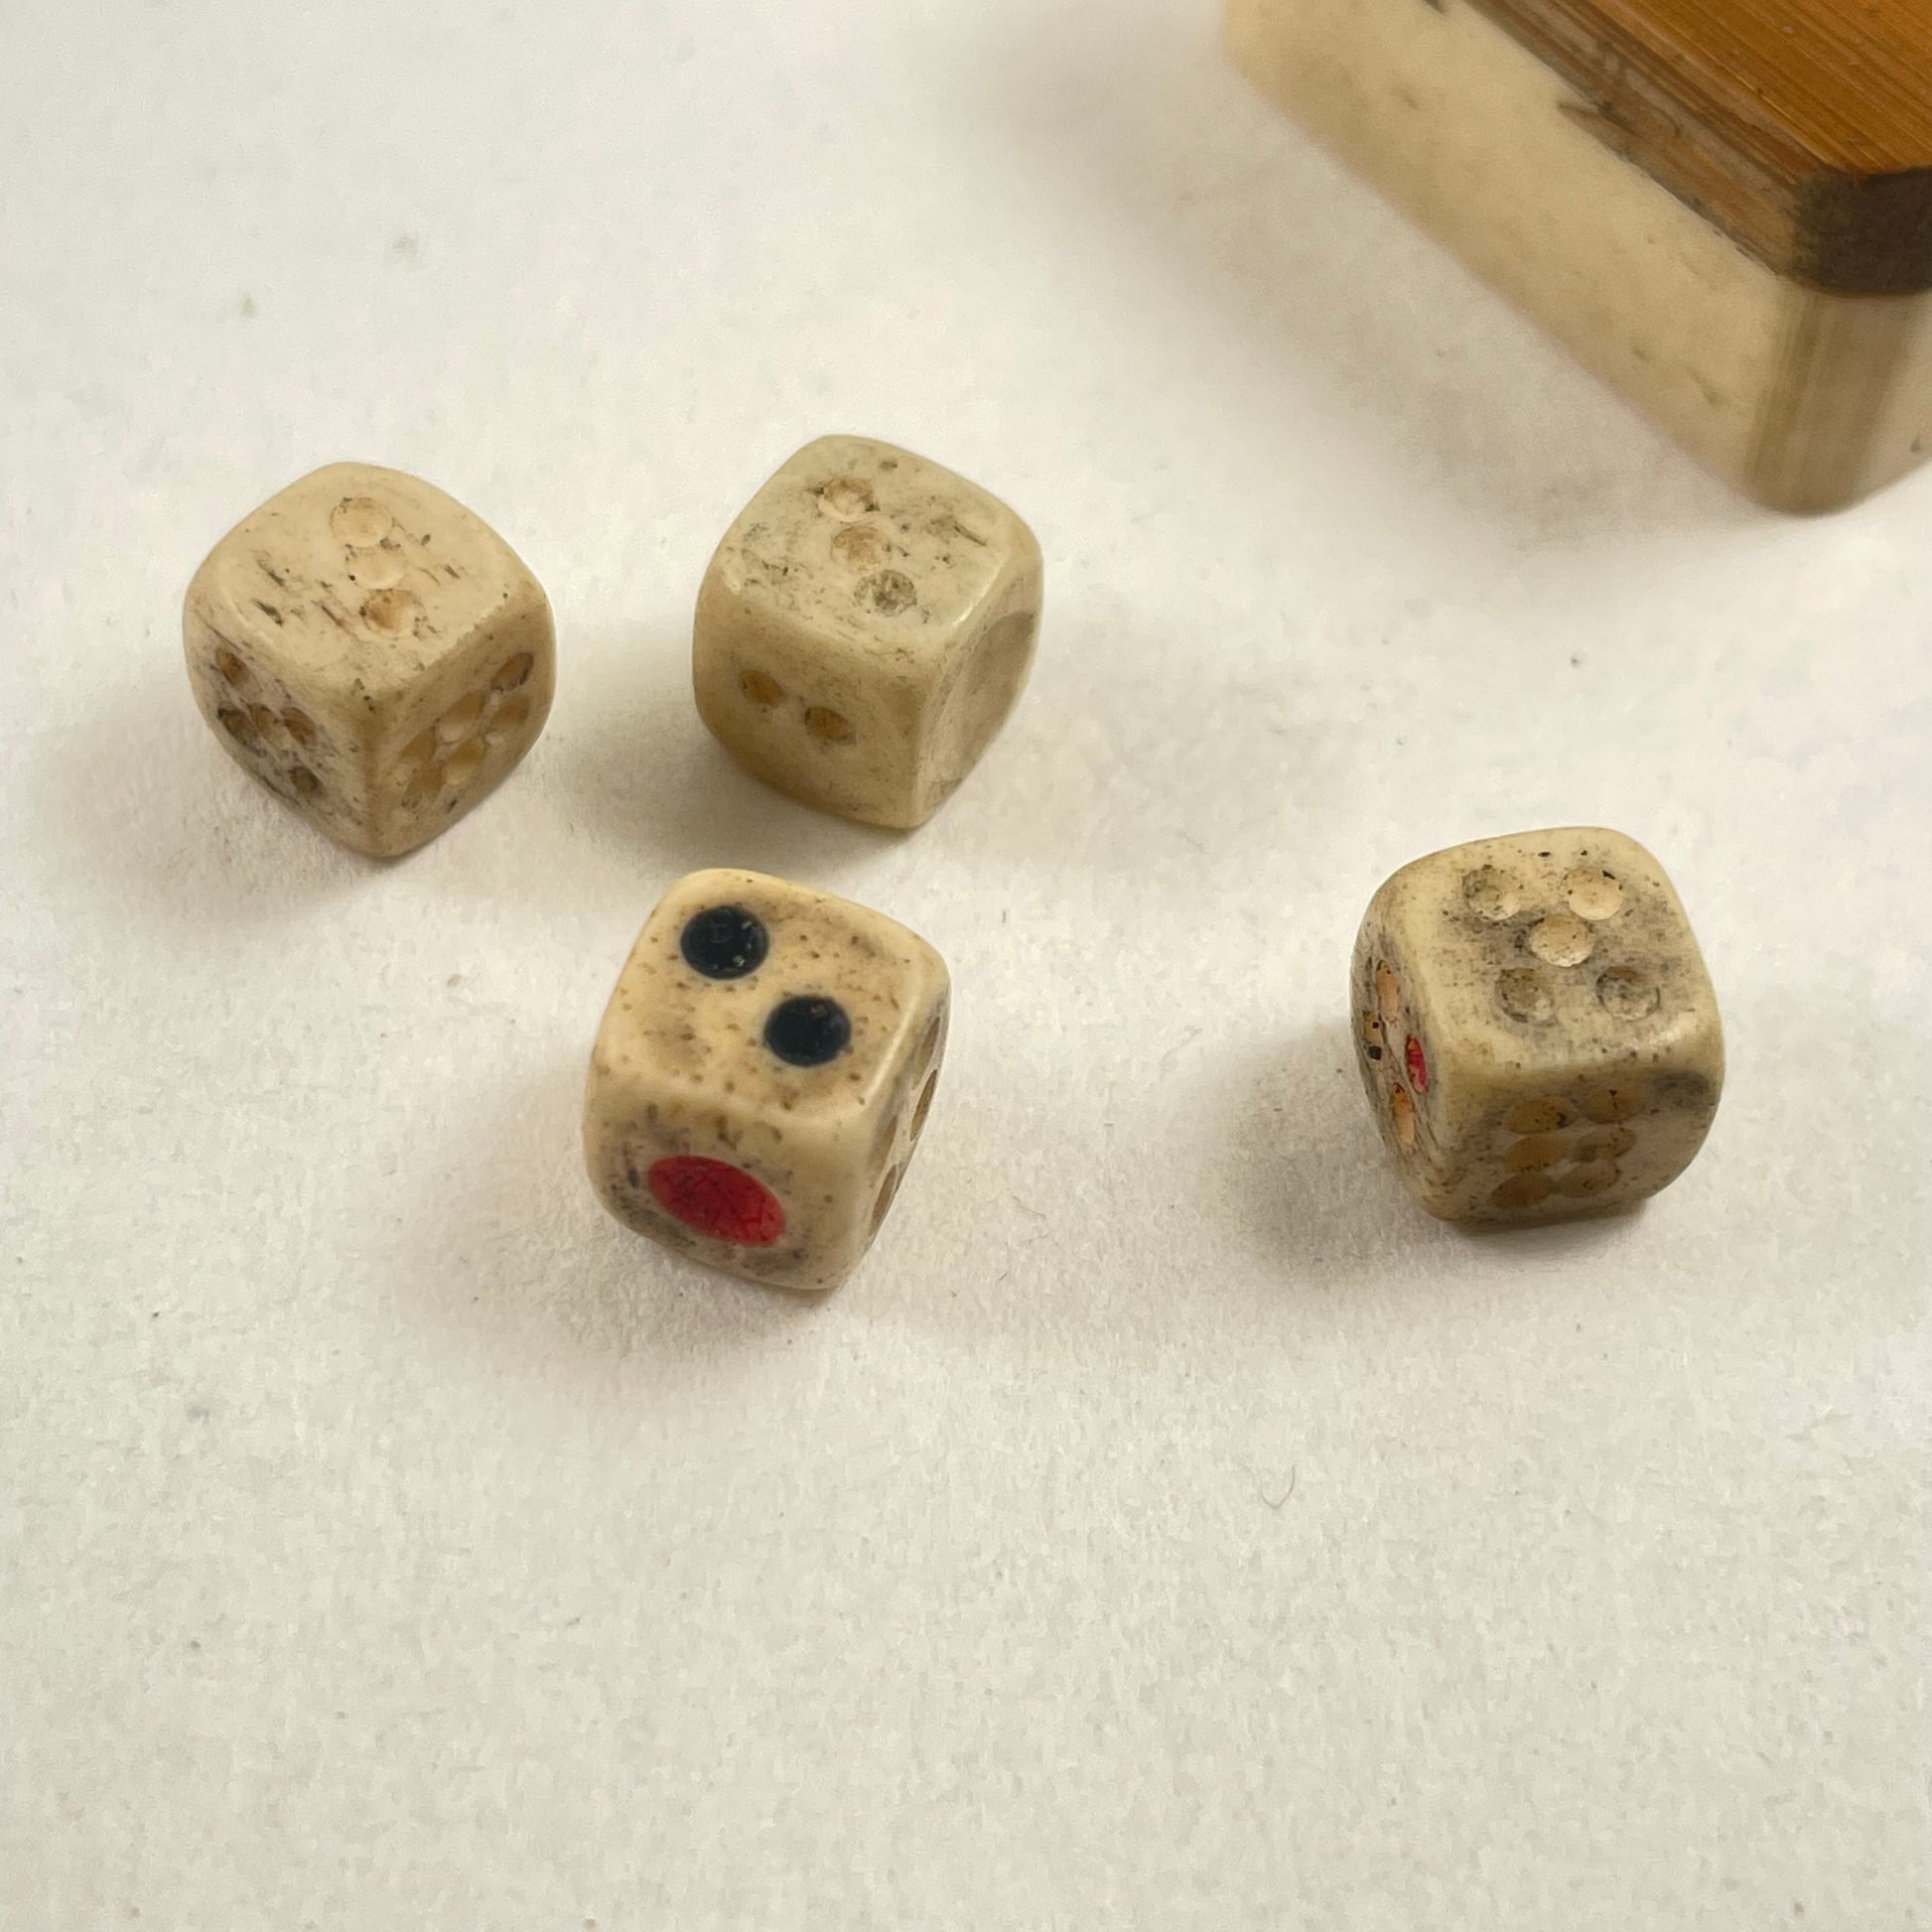 Sold at Auction: One Hundred & Forty Nine Bone & Bamboo Mahjong Tiles, Four  Blanks, Dice & Counters in a Vintage Tin Box, 20th C.